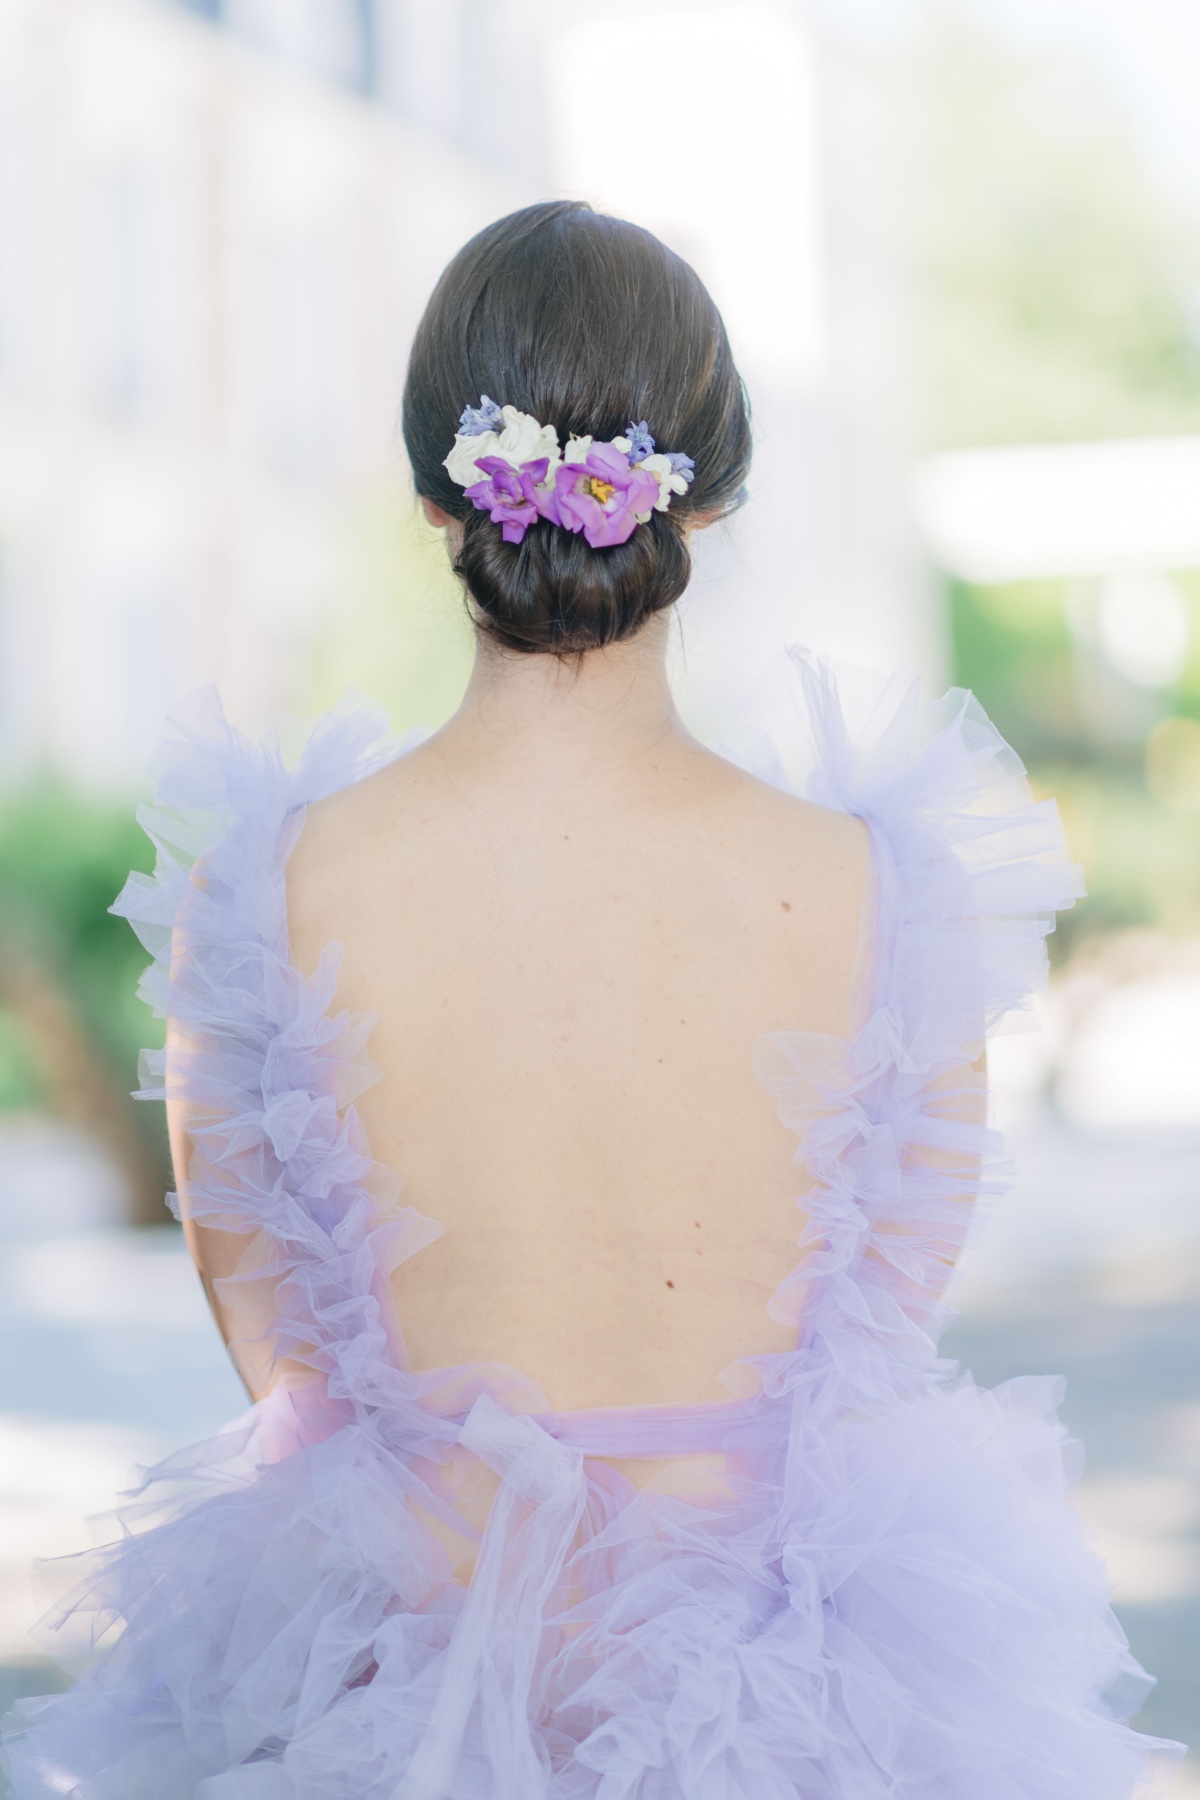 View of bridesmaid updo with floral hair piece